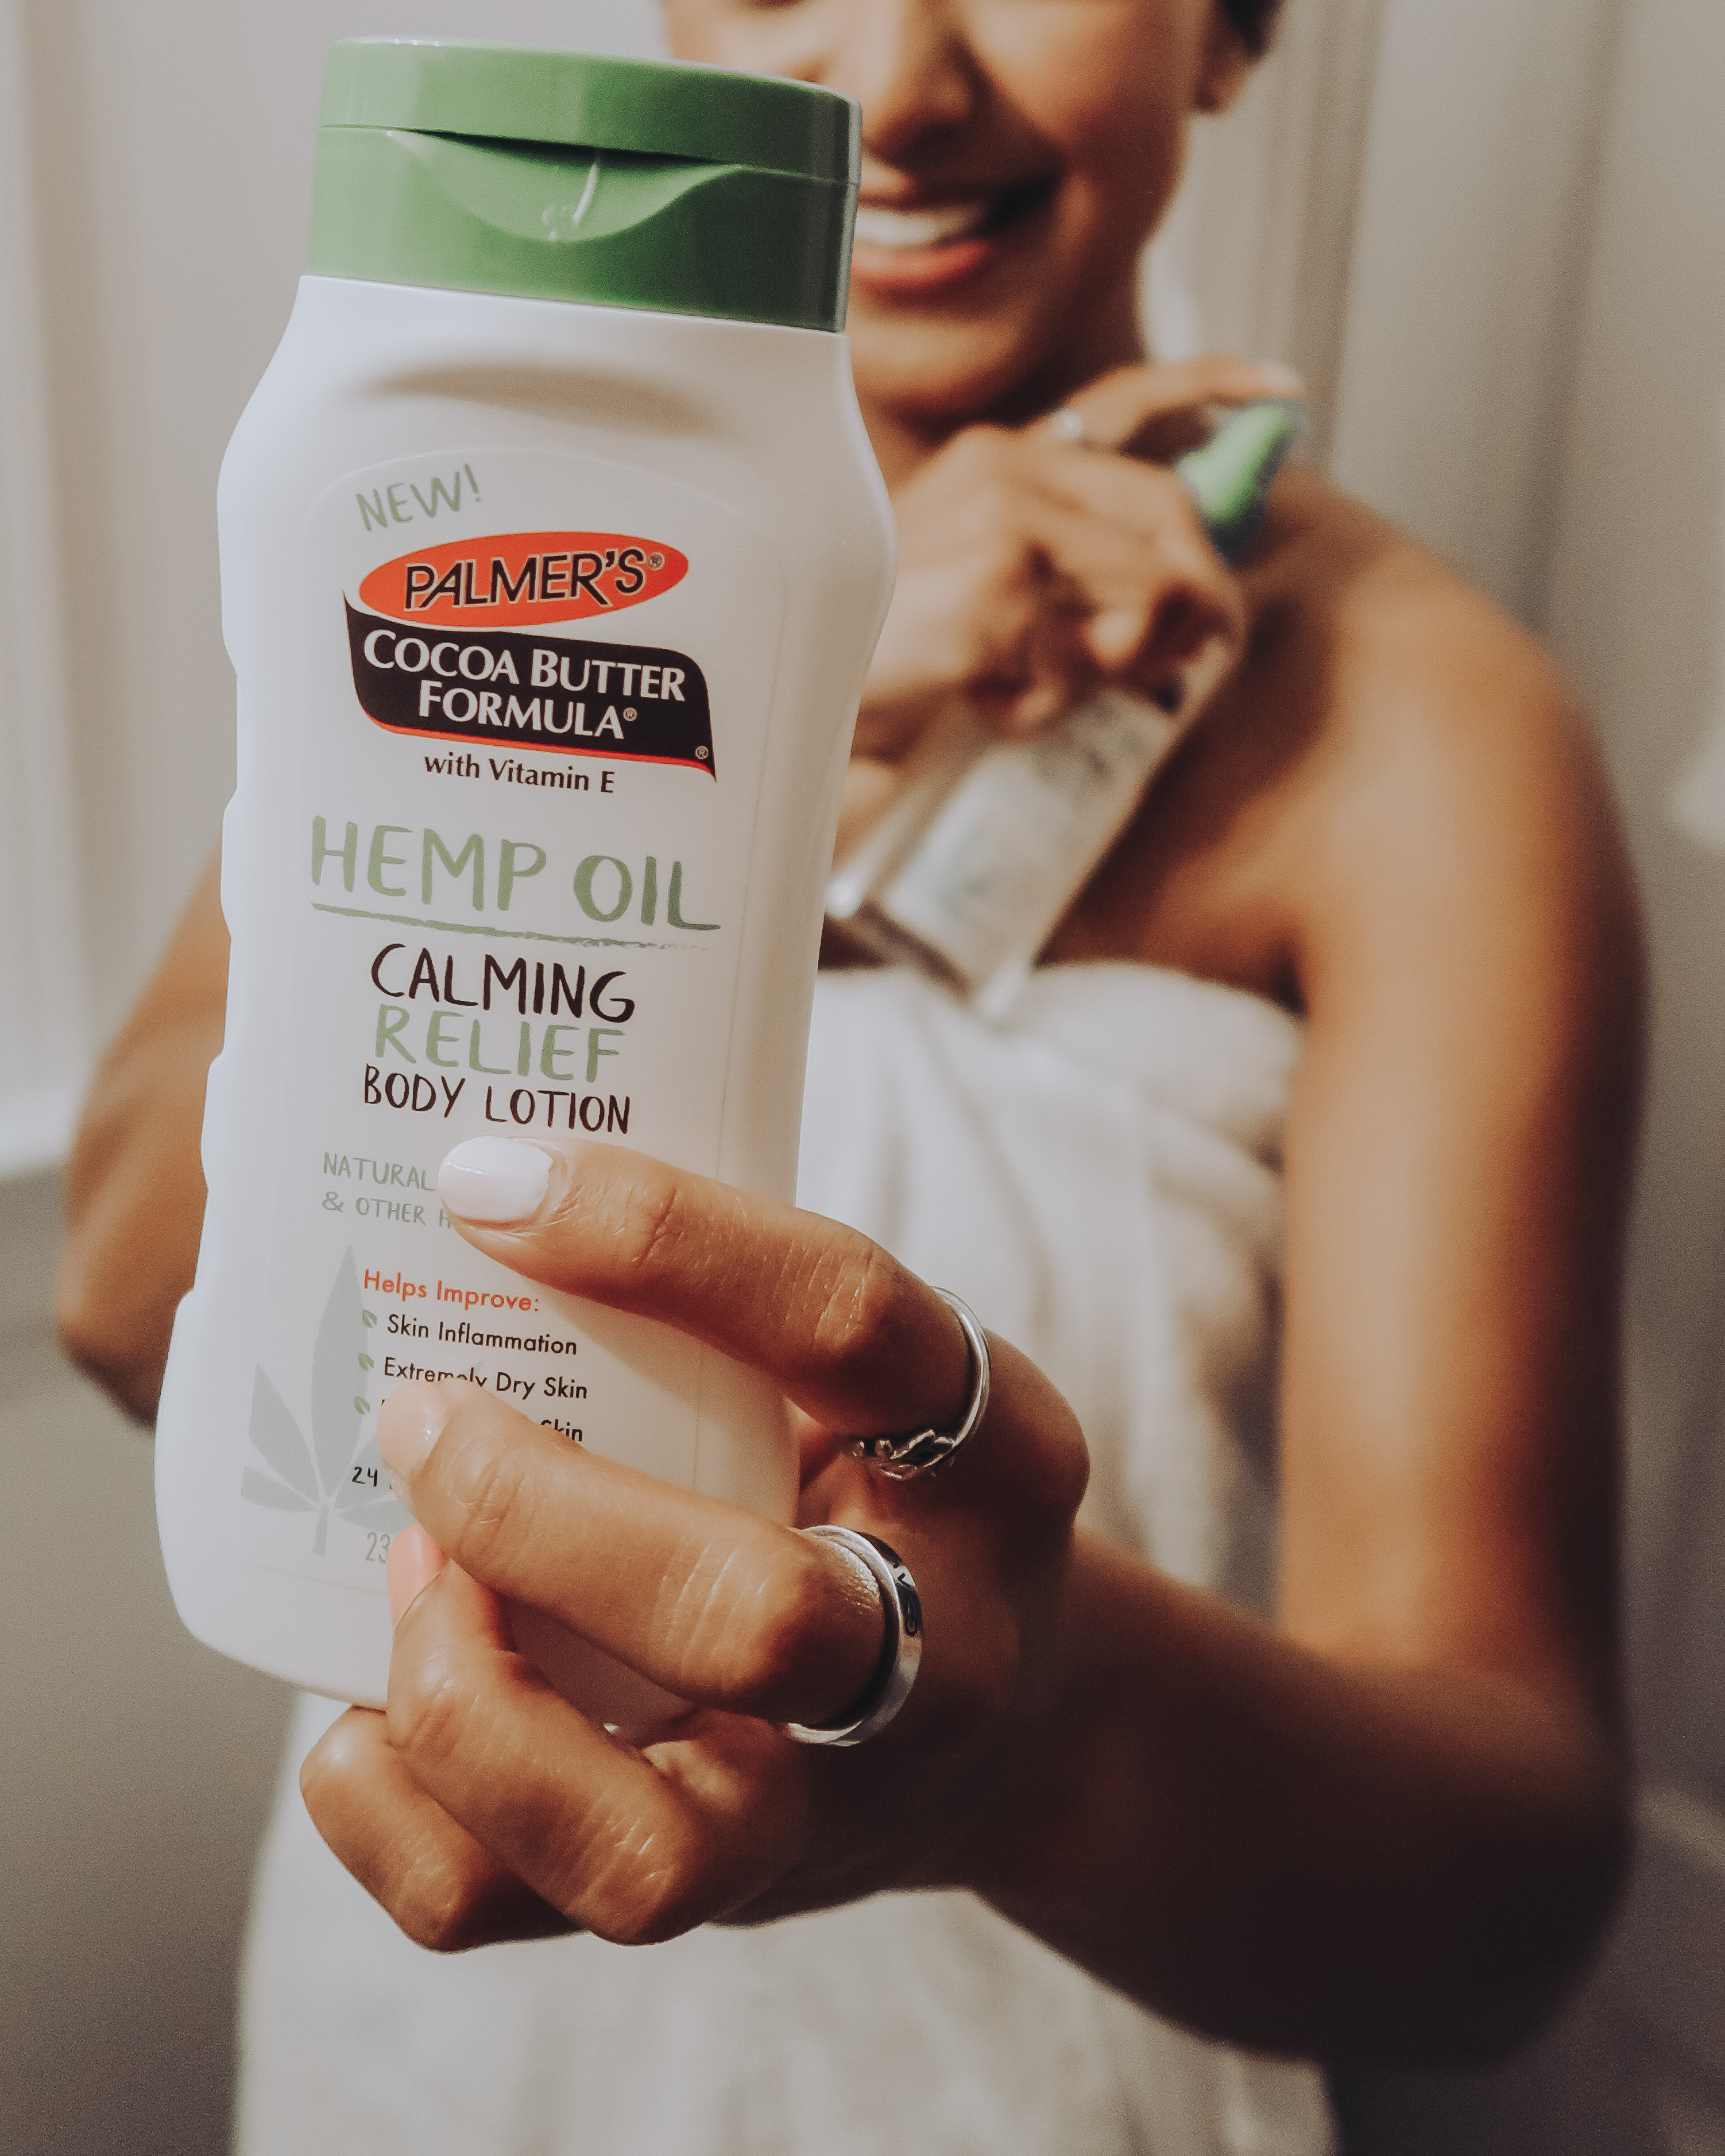 Palmer's Hemp Oil Calming Relief Body Lotion for dry, irritated skin in hand